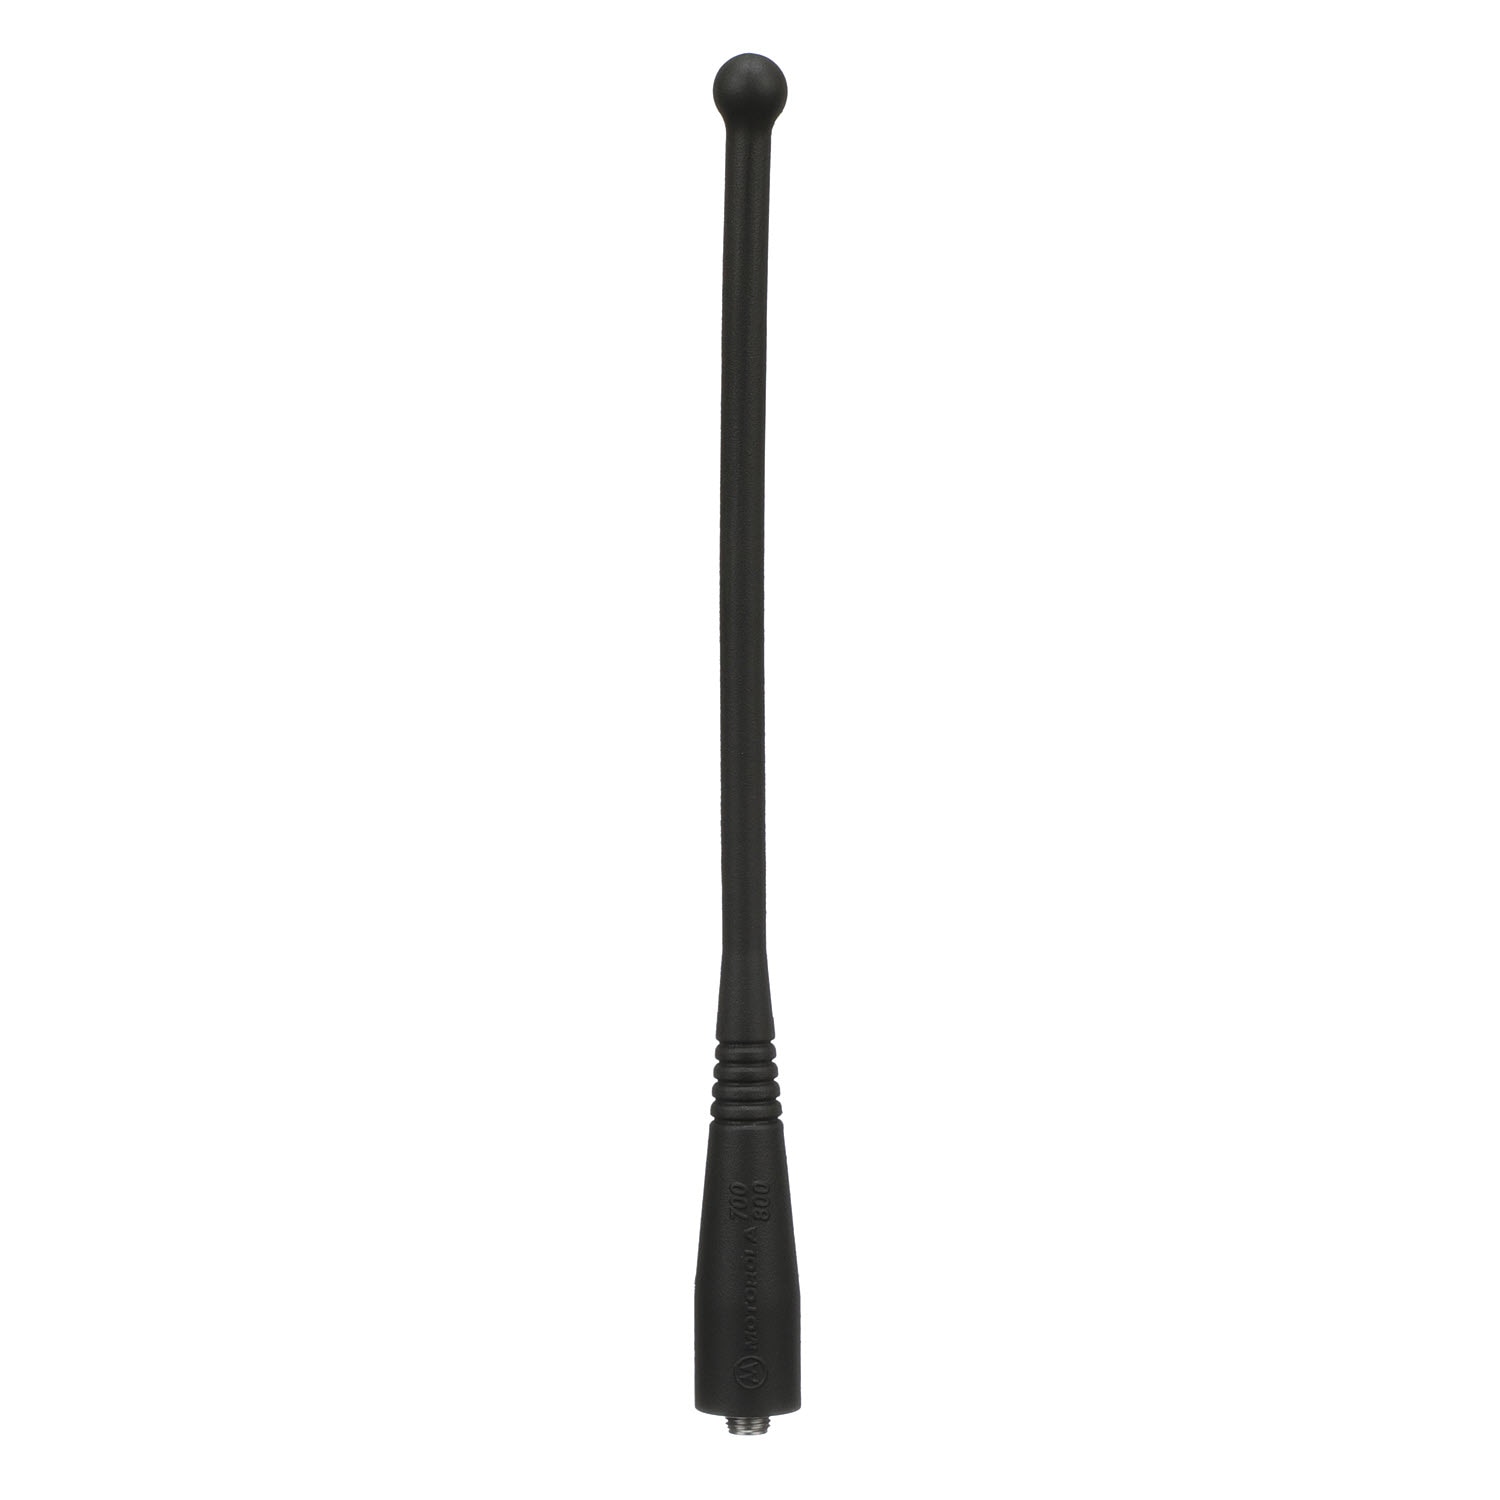 Details about   New Motorola 0180359A13 Whip Antenna Assembly Antwhip 12.5” 